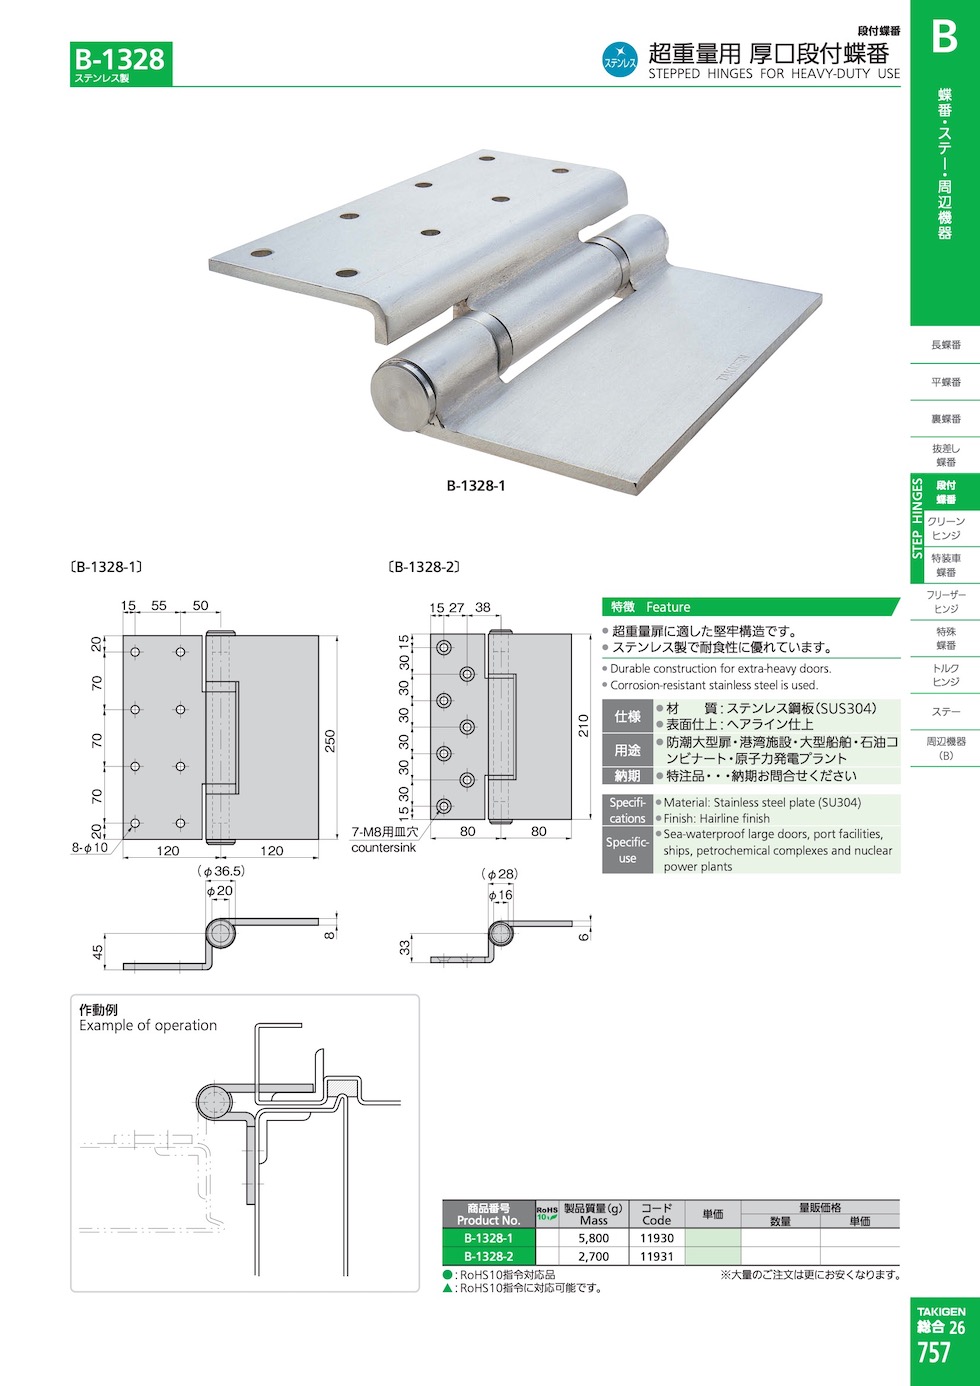 STEPPED HINGES FOR HEAVY-DUTY USE